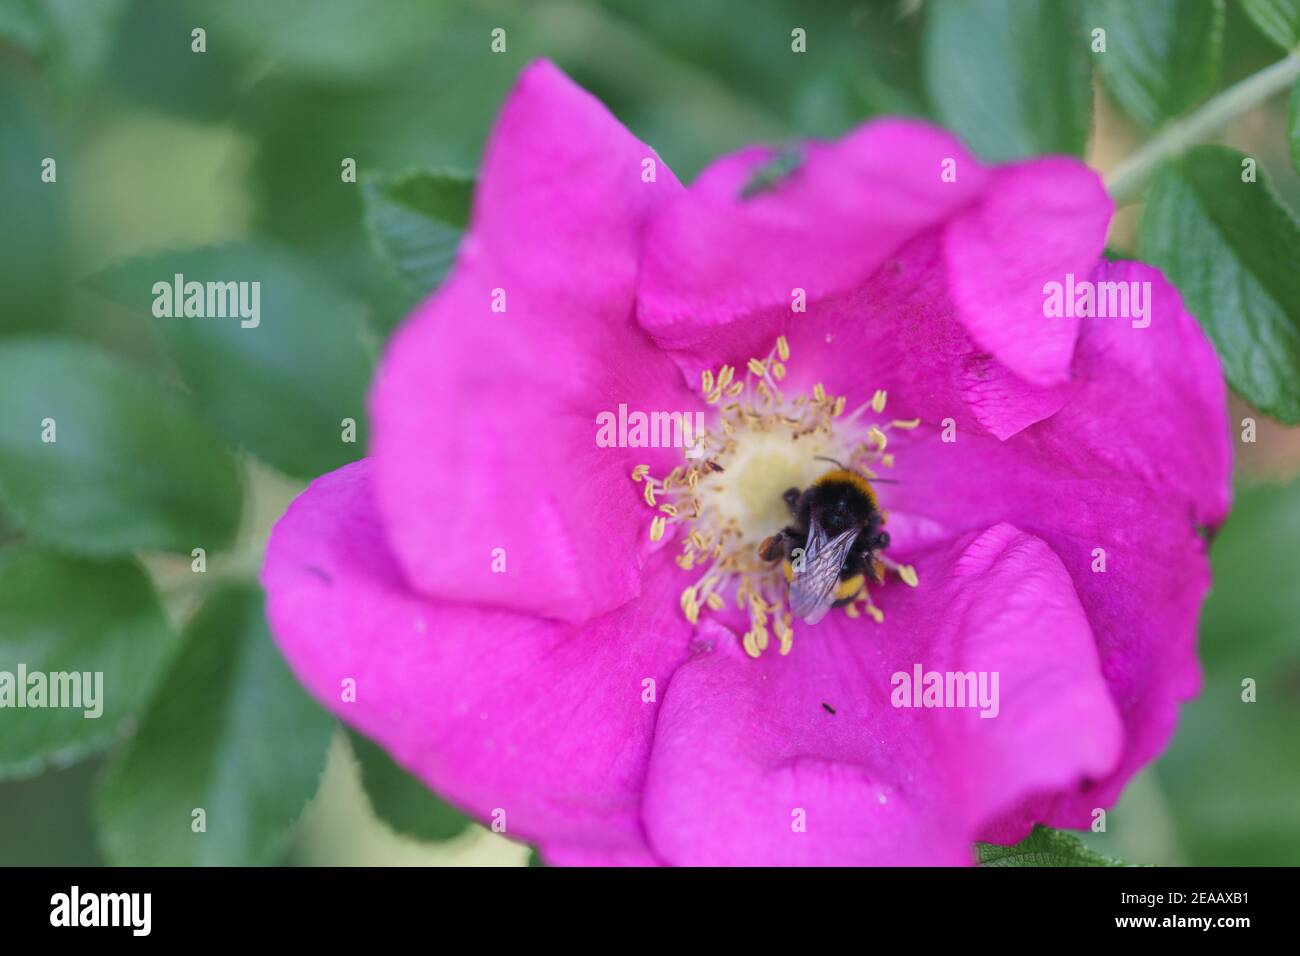 A fat humble bee searching nectar a pink blooming flower Stock Photo